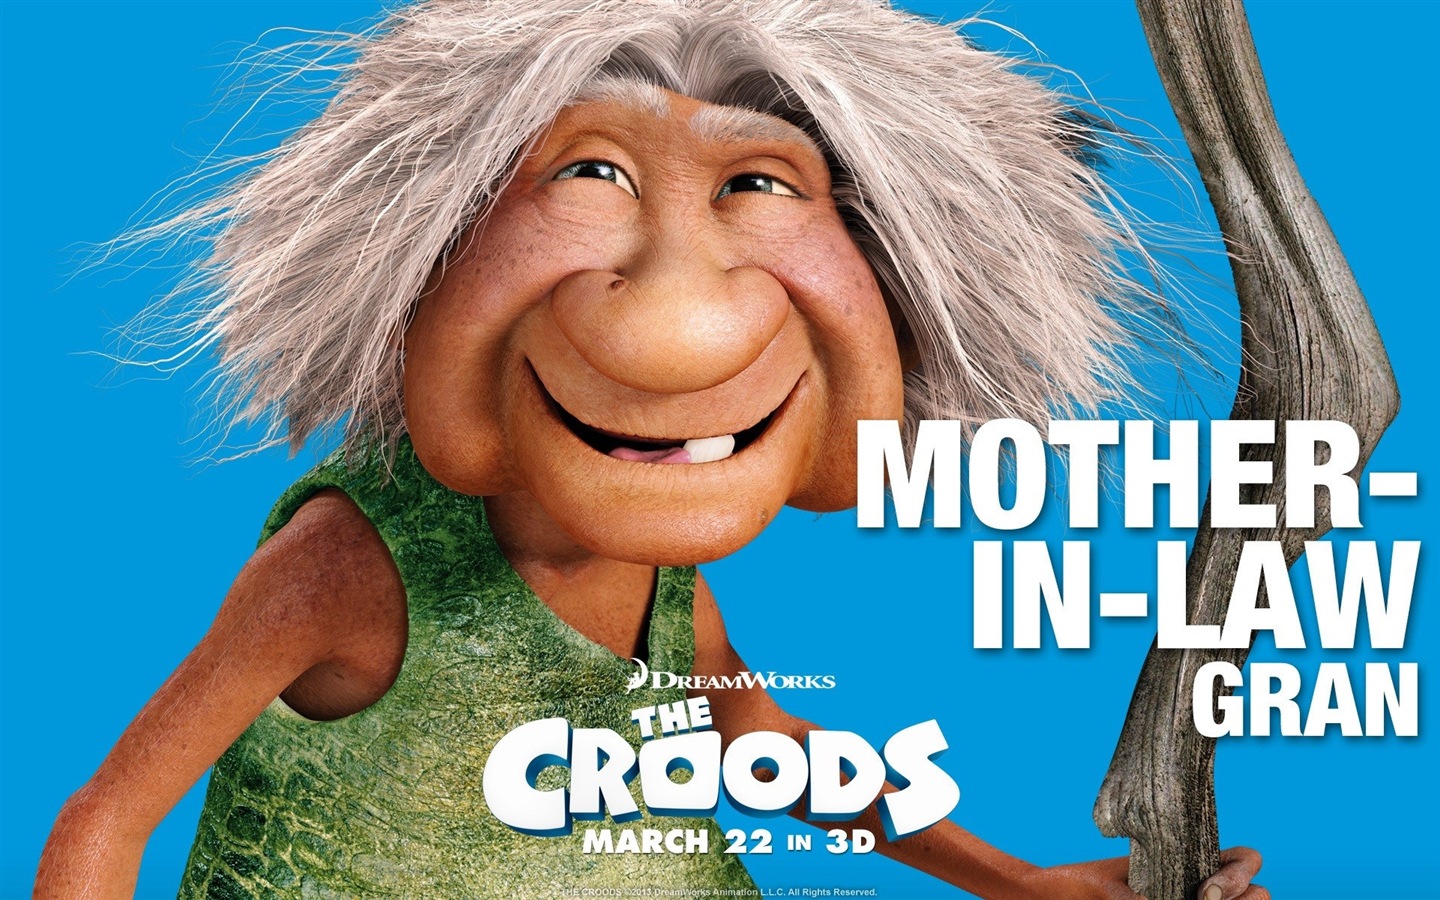 V Croods HD Movie Wallpapers #6 - 1440x900